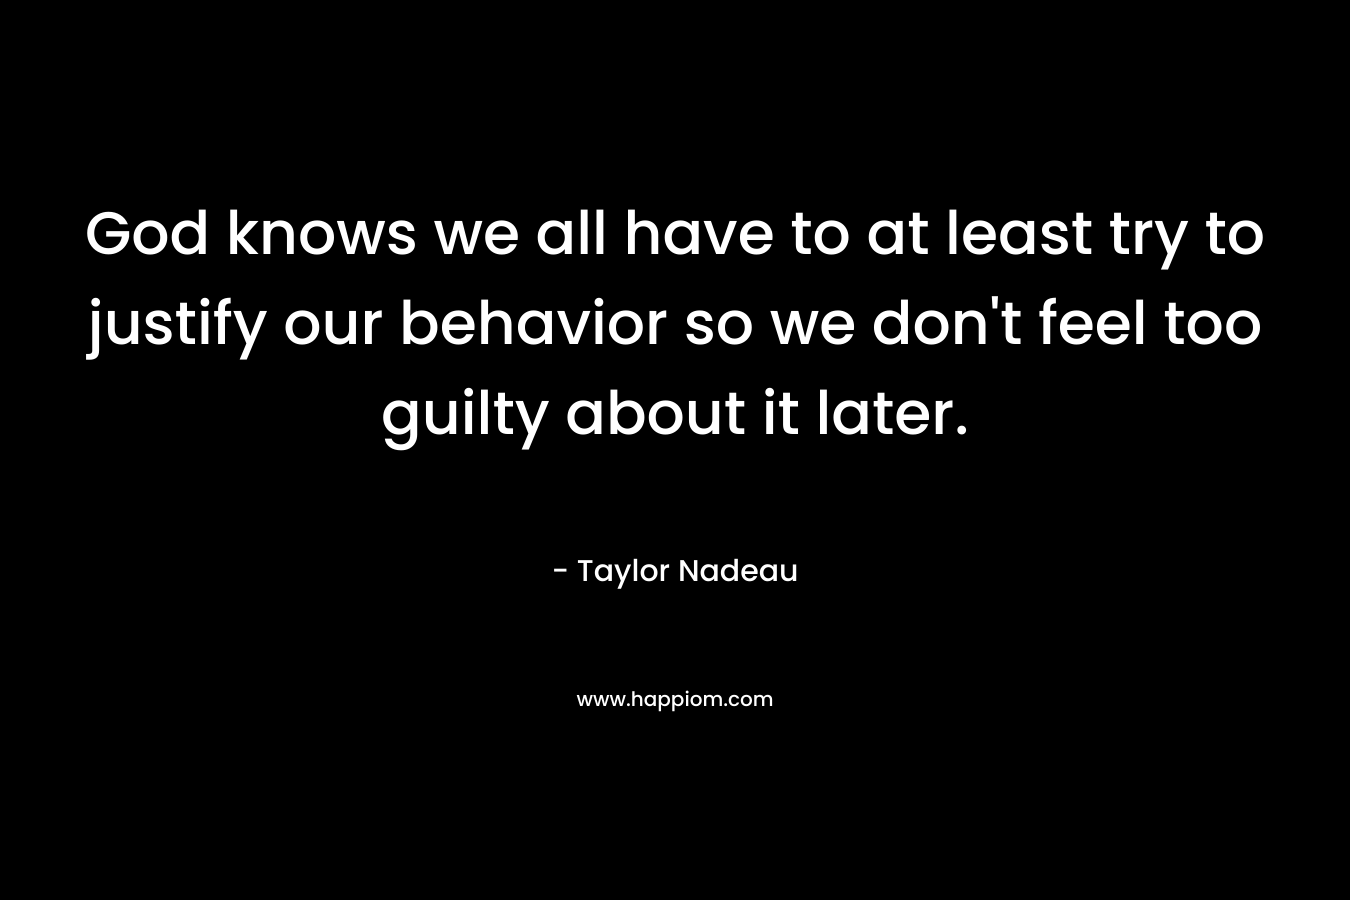 God knows we all have to at least try to justify our behavior so we don’t feel too guilty about it later. – Taylor Nadeau